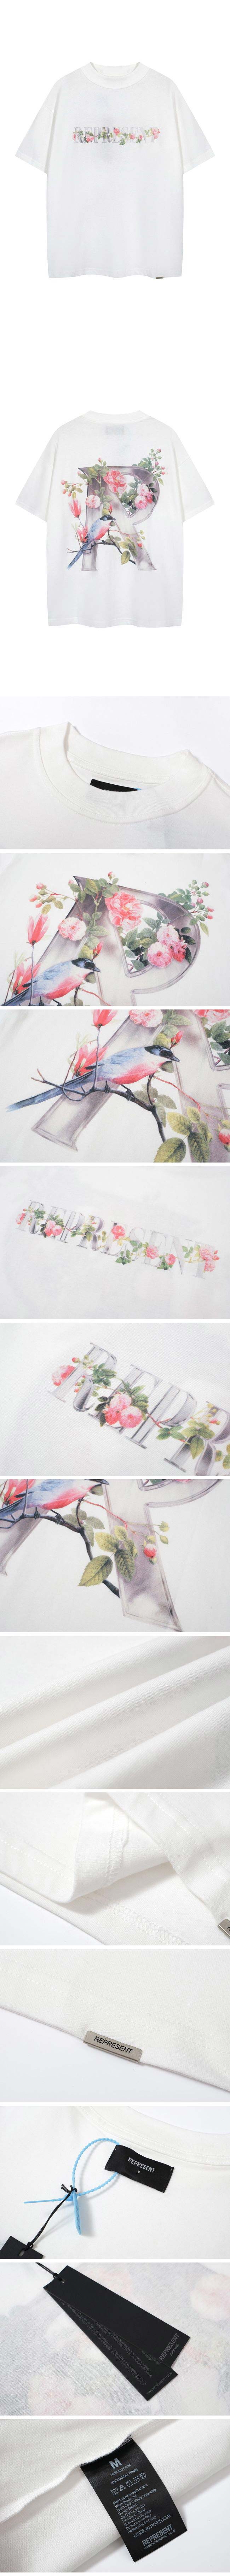 Represent Floral Initial Print Tee リプレゼント フローラル イニシャル プリント Tシャツ ホワイト